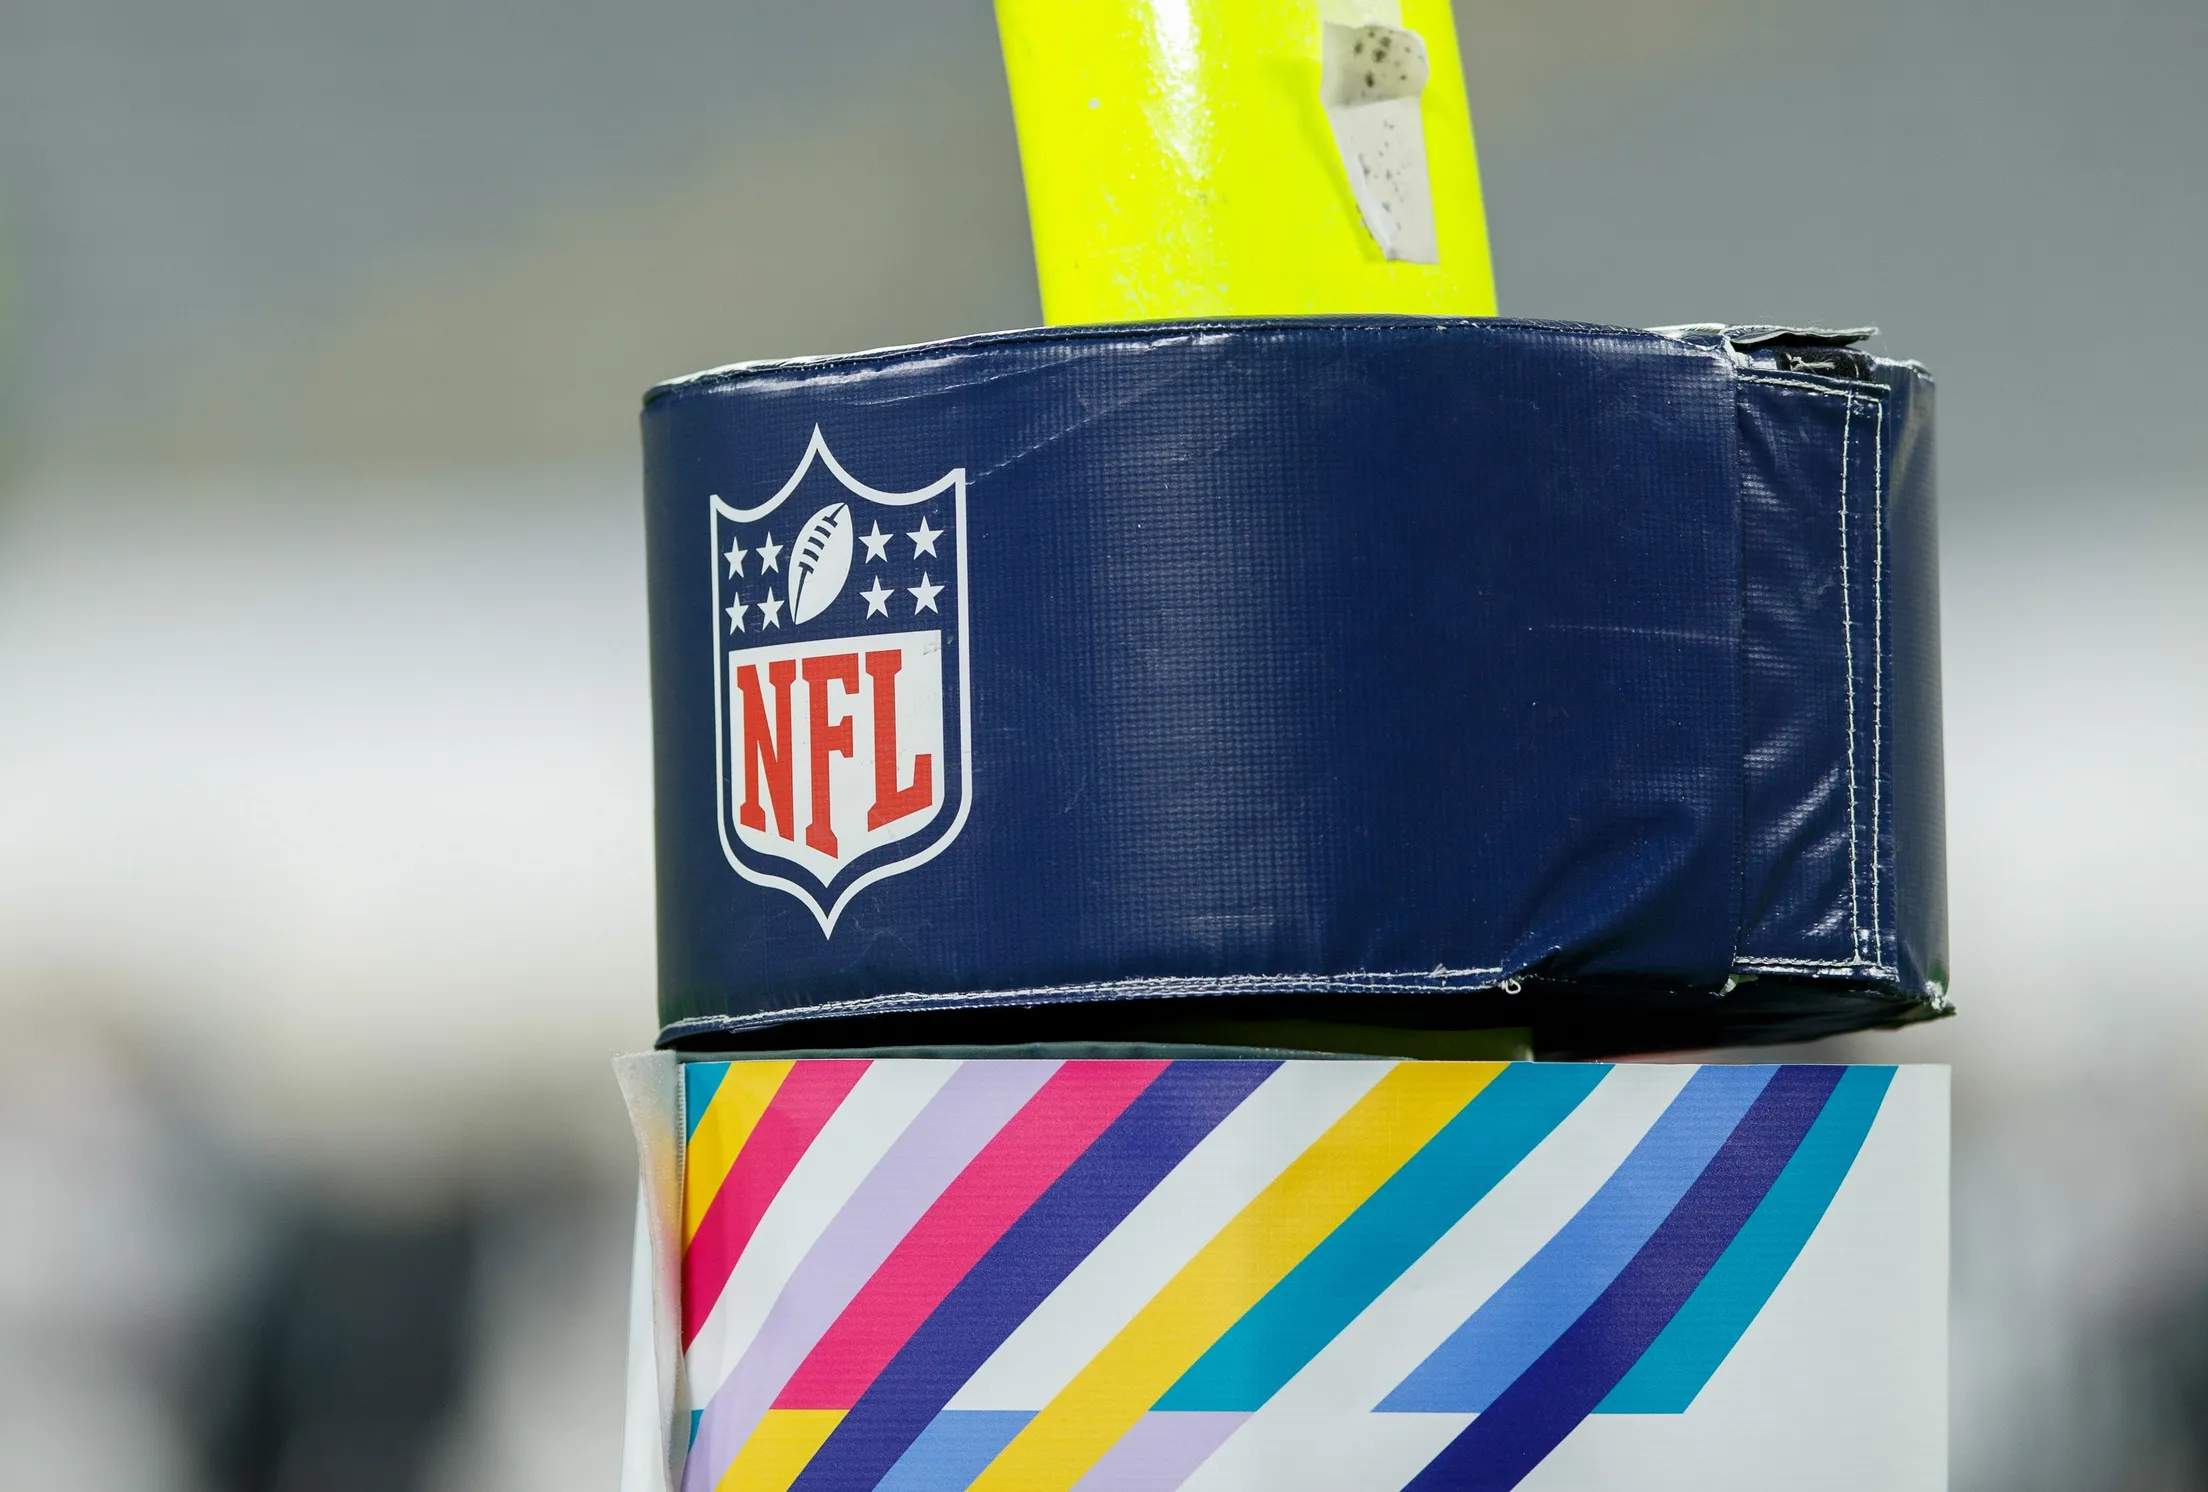 The Impact of Television Deals on the NFL